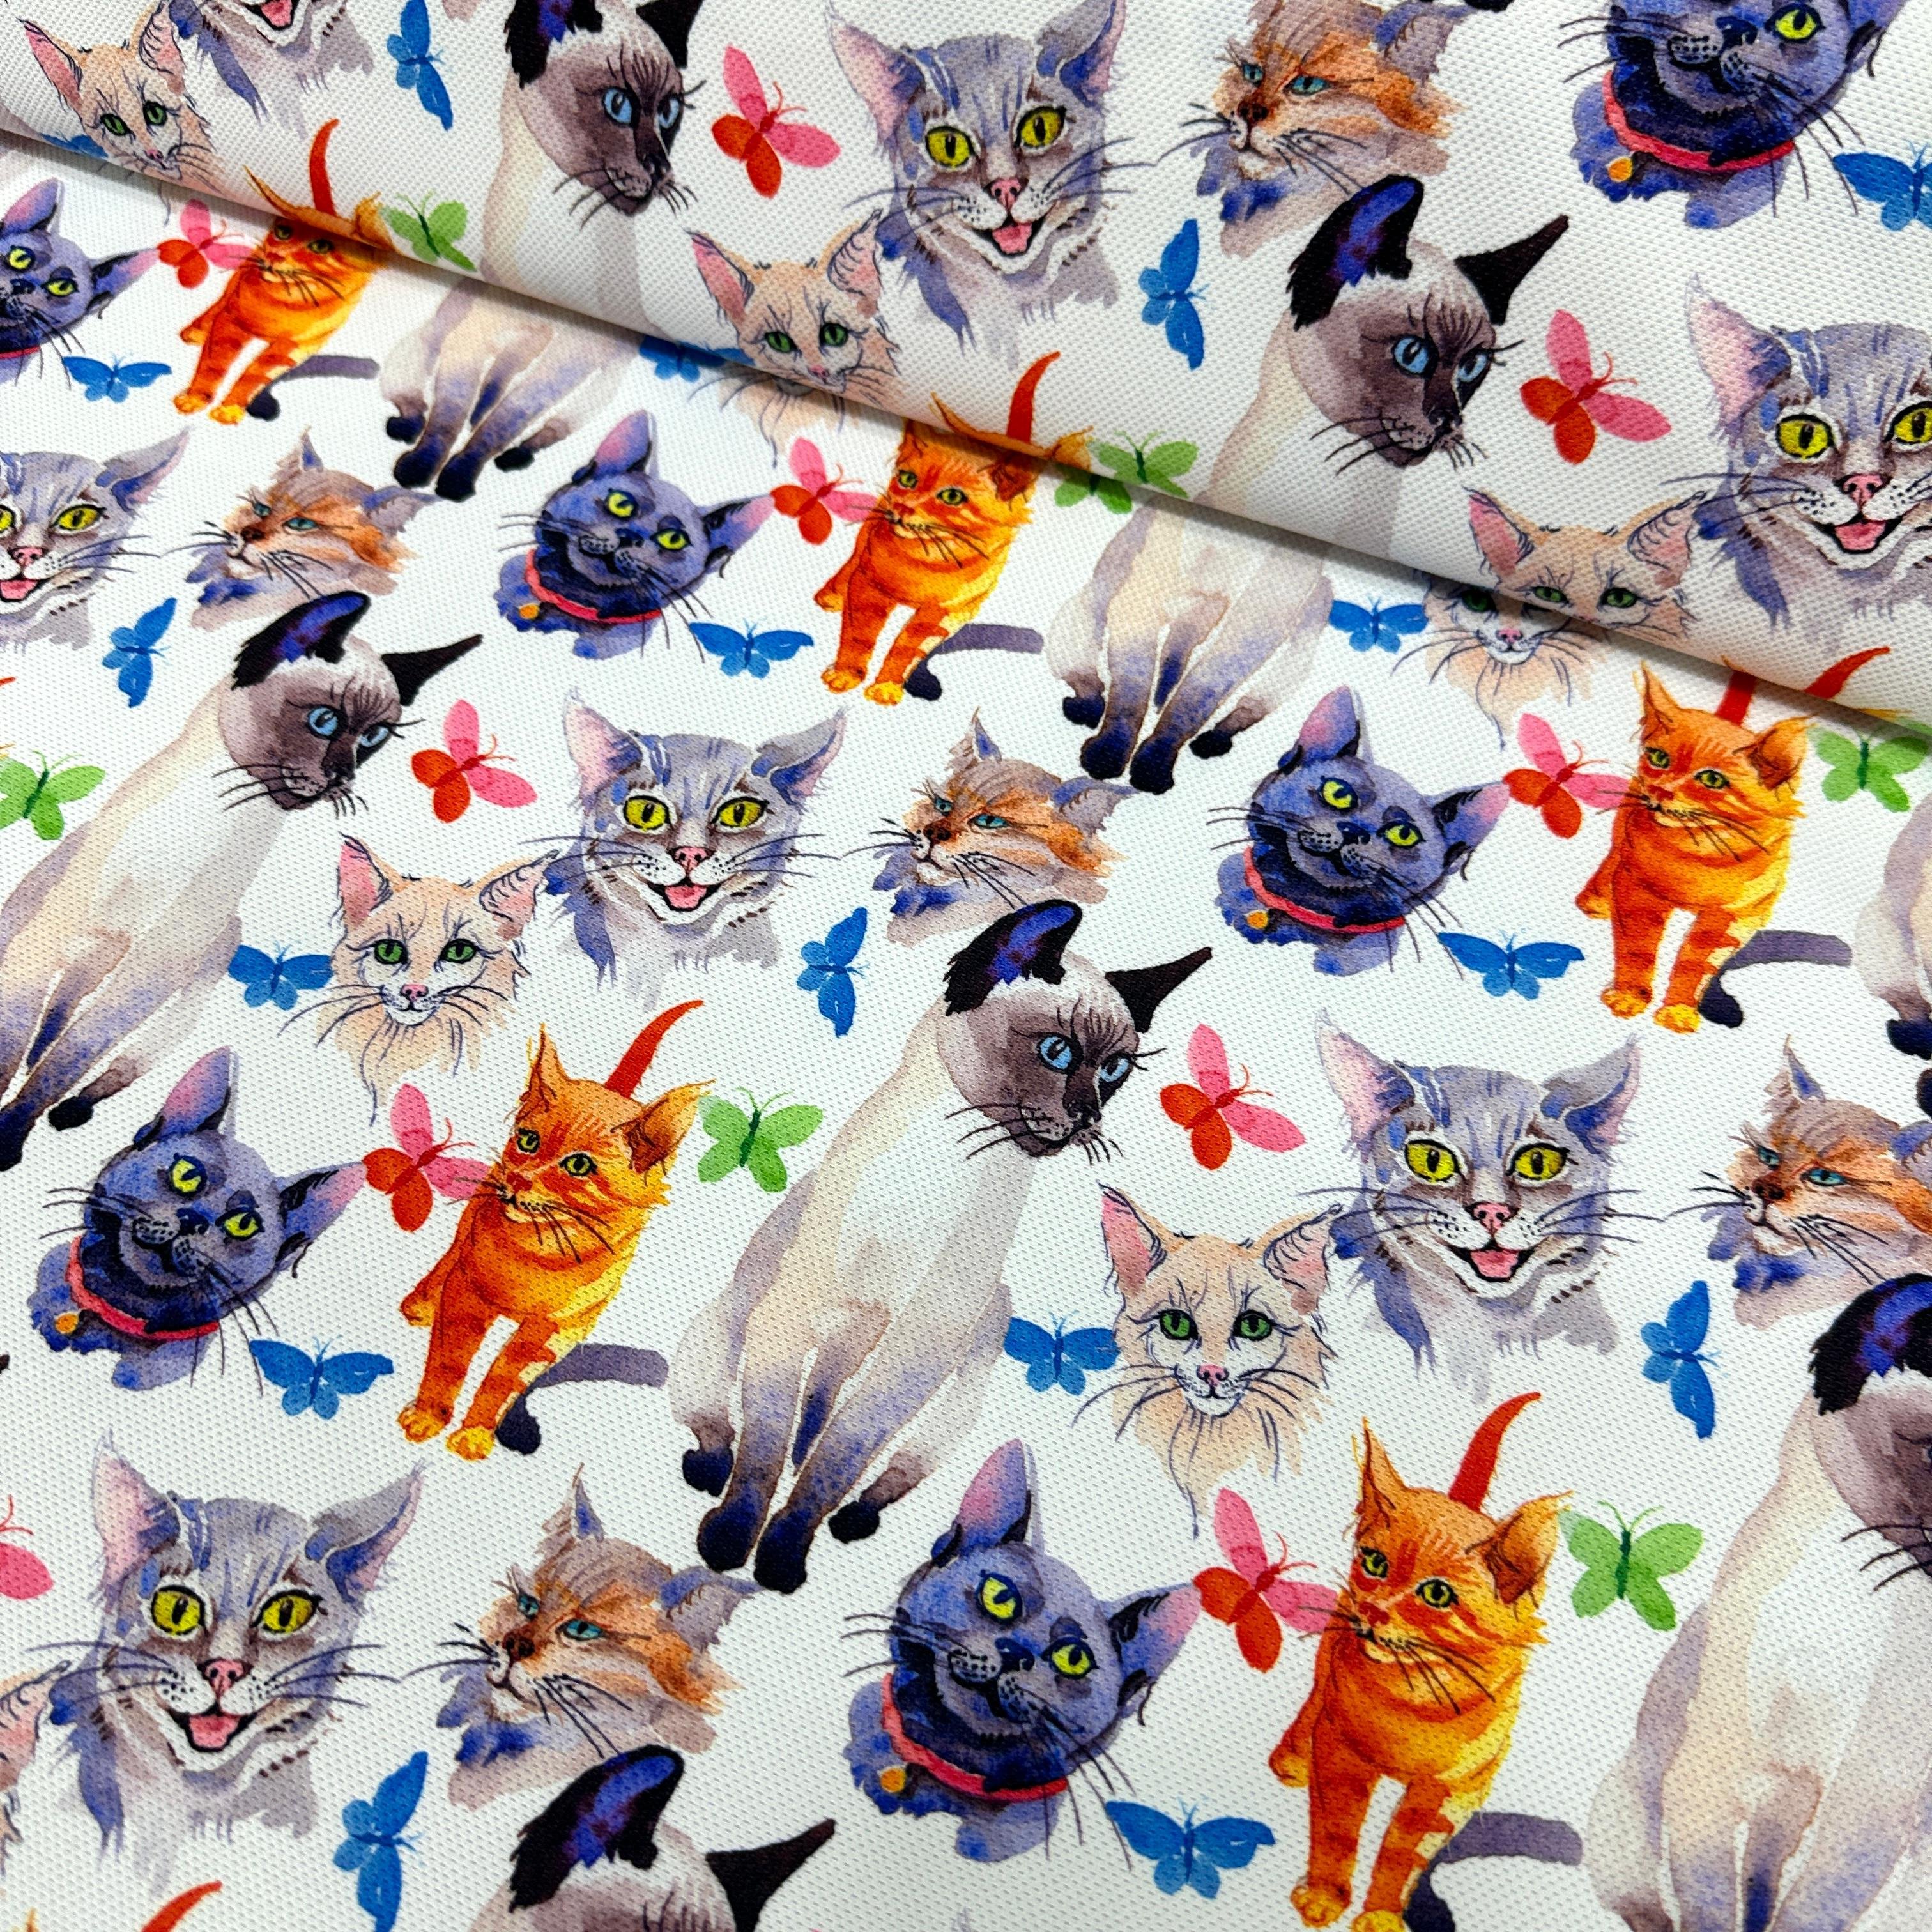 Cats and Butterflies Digital Printing Fabric